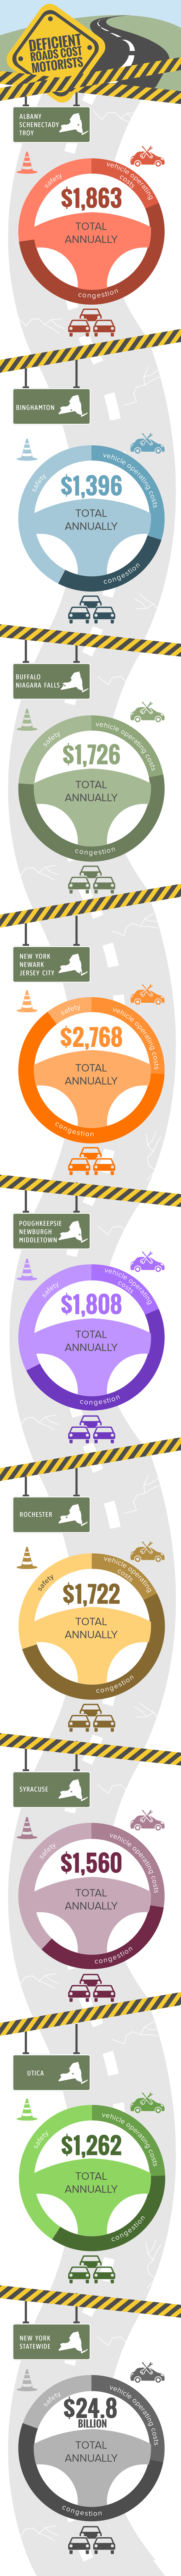 New York Cost to Motorists Infographic